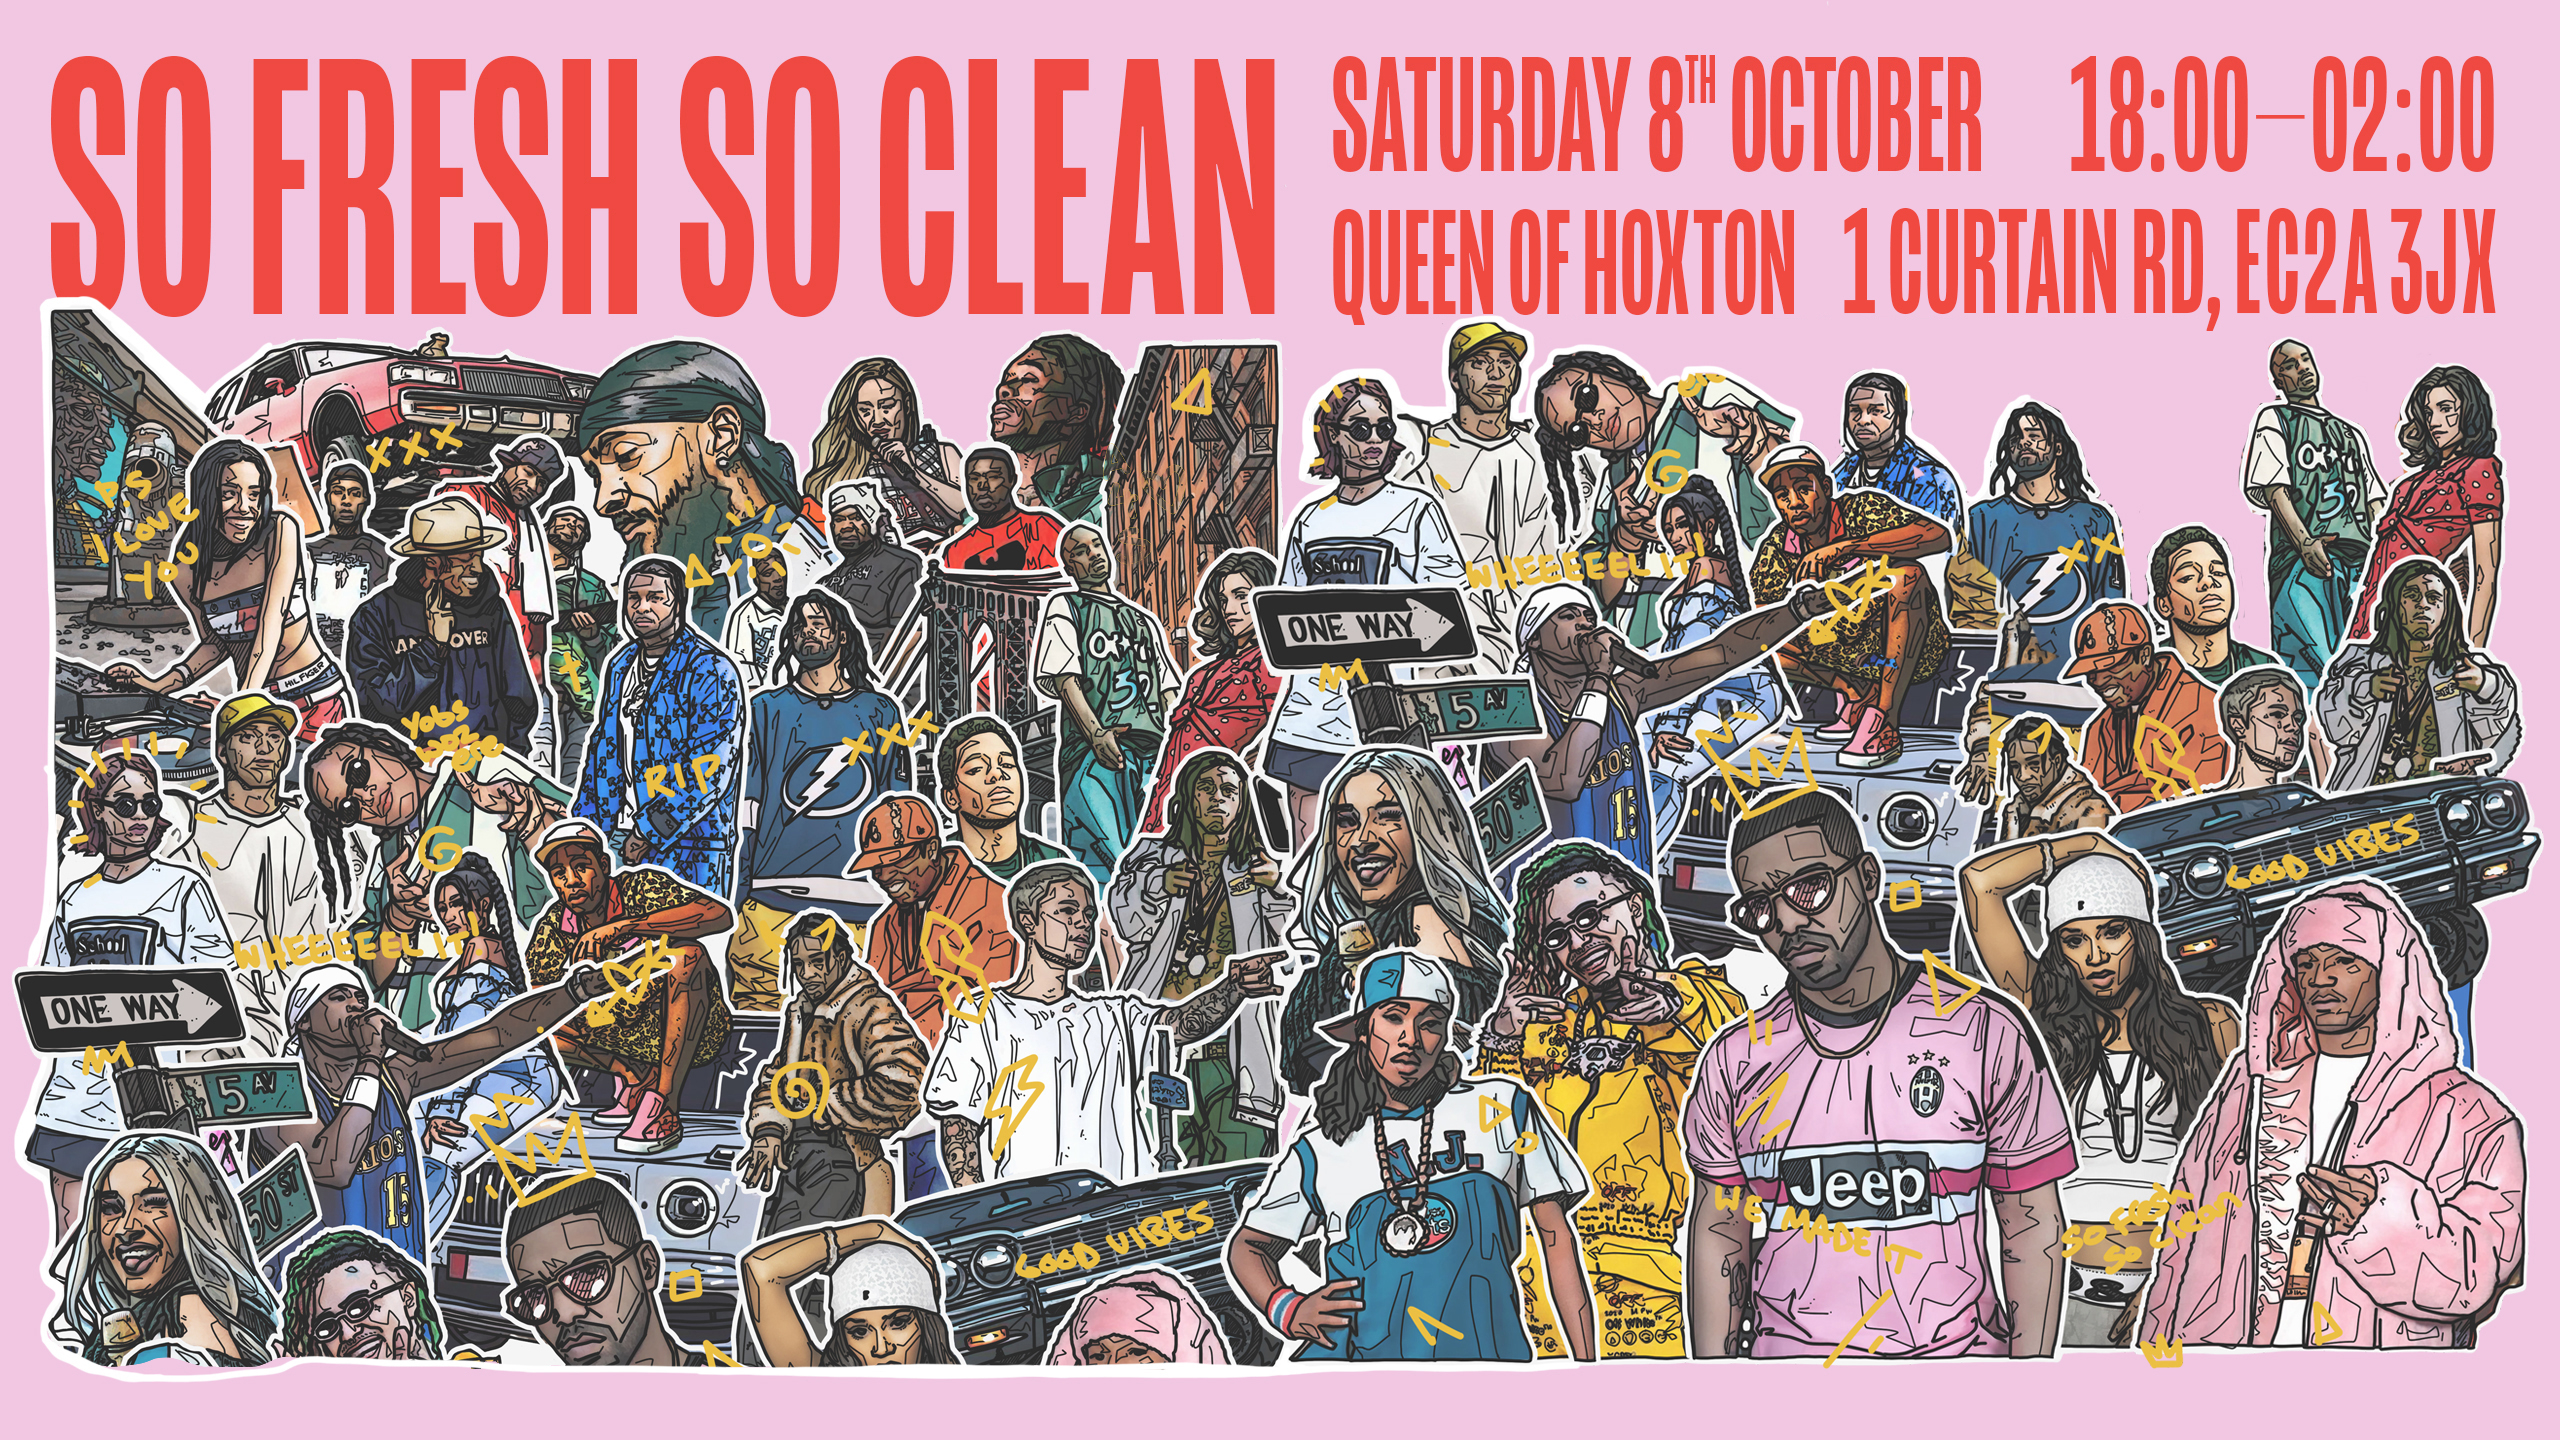 So Fresh So Clean - Saturday 8th October - Flyer front